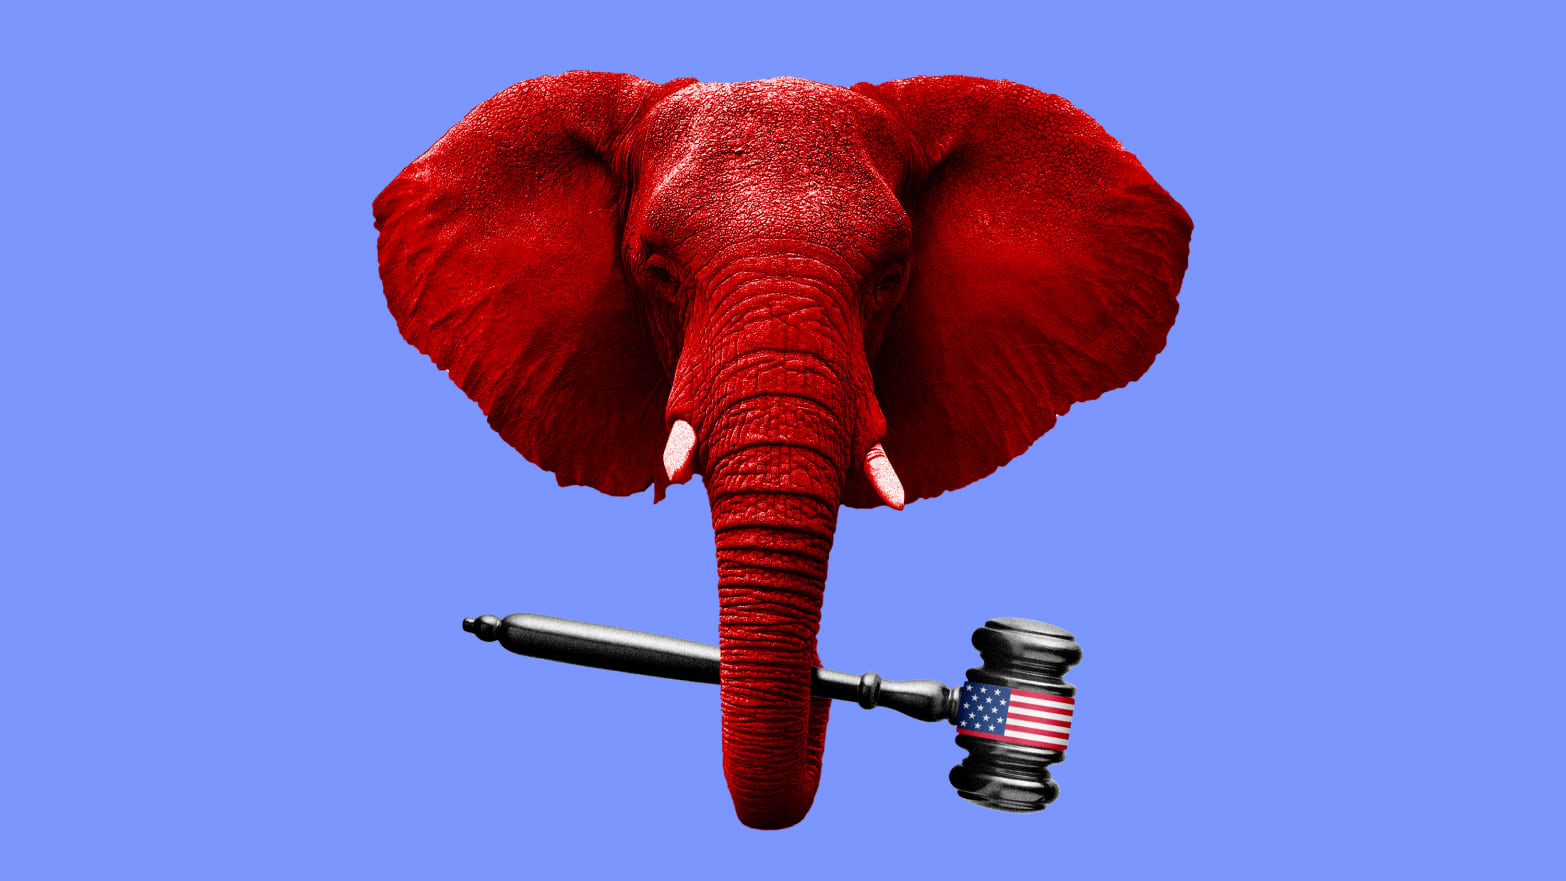 A red elephant holds a gavel with an American flag.